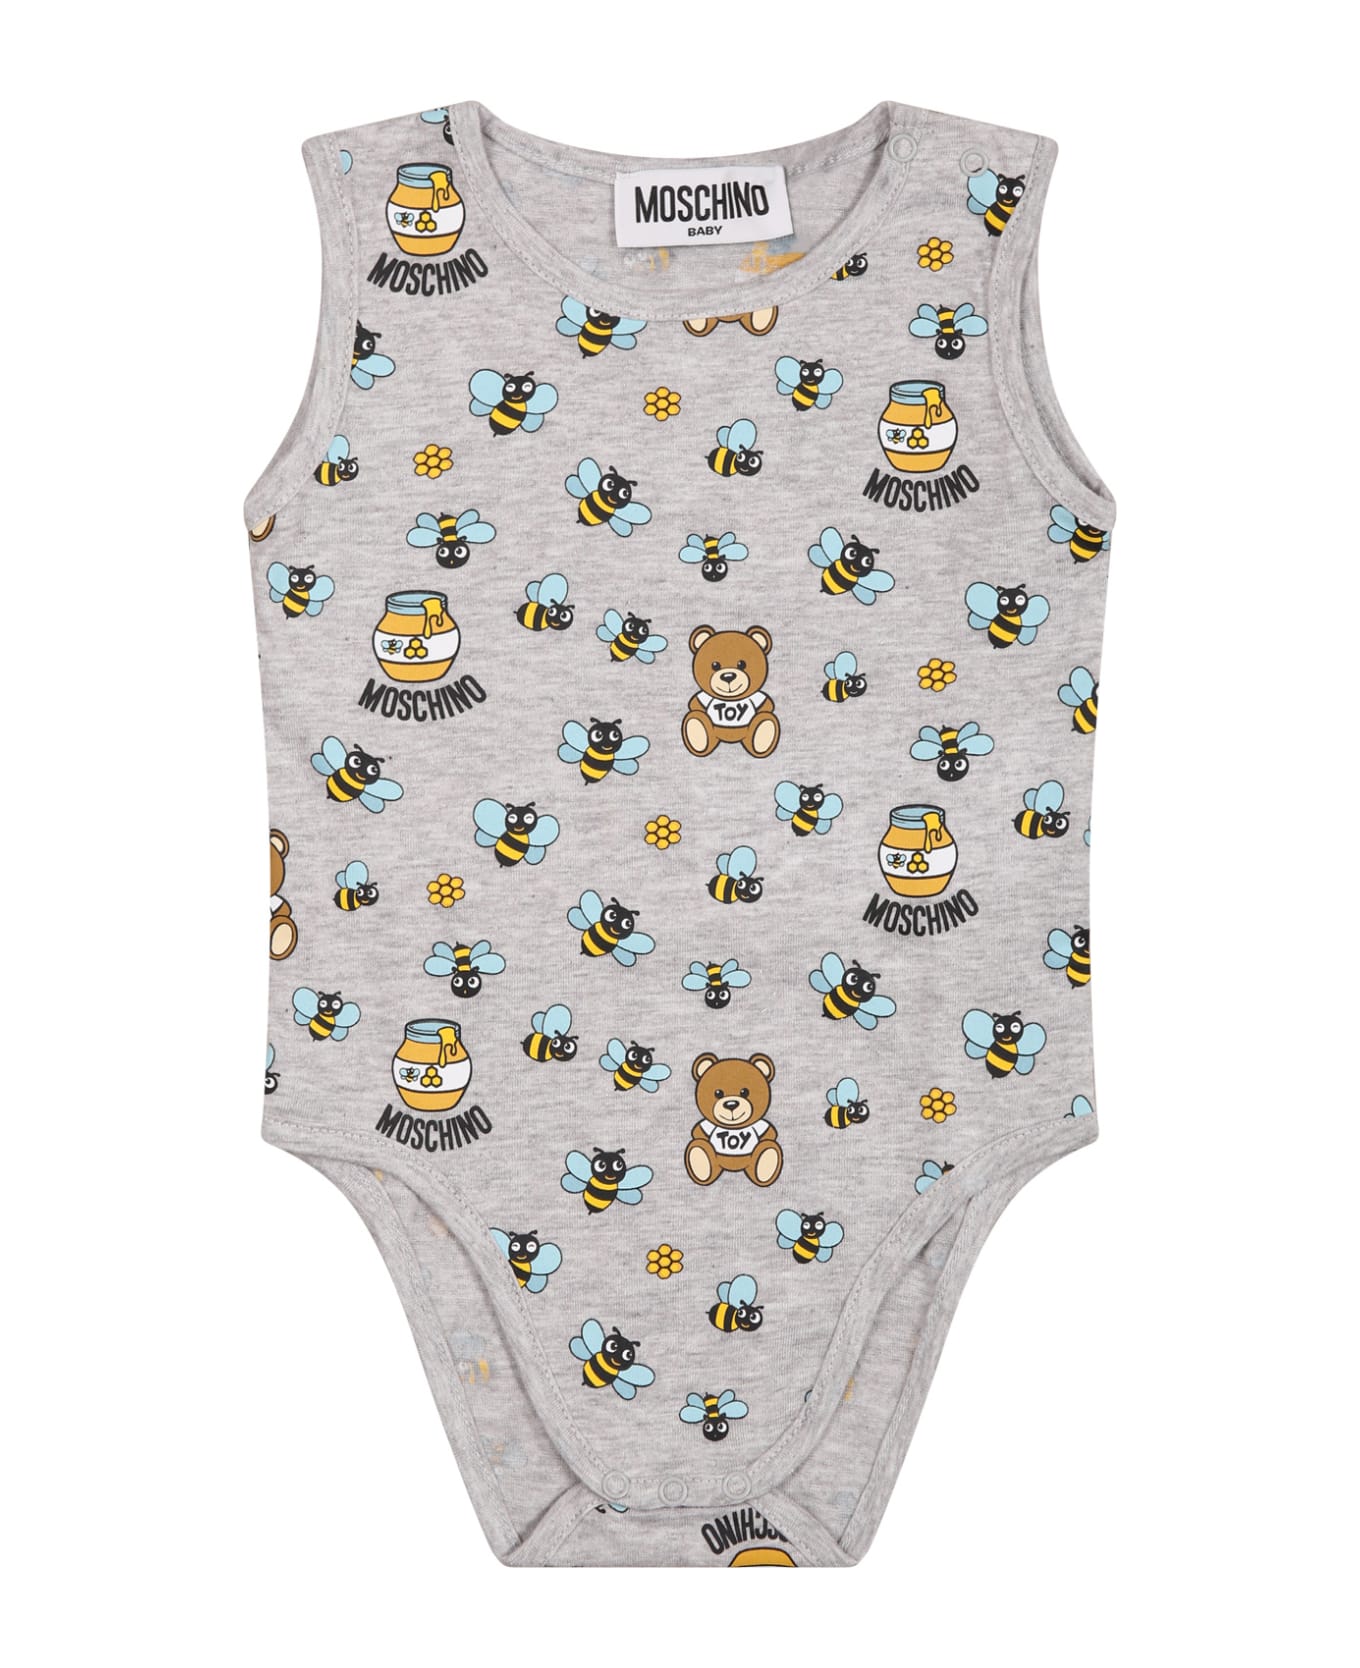 Moschino Multicolor Set For Babies With Teddy Bear And Print - Multicolor